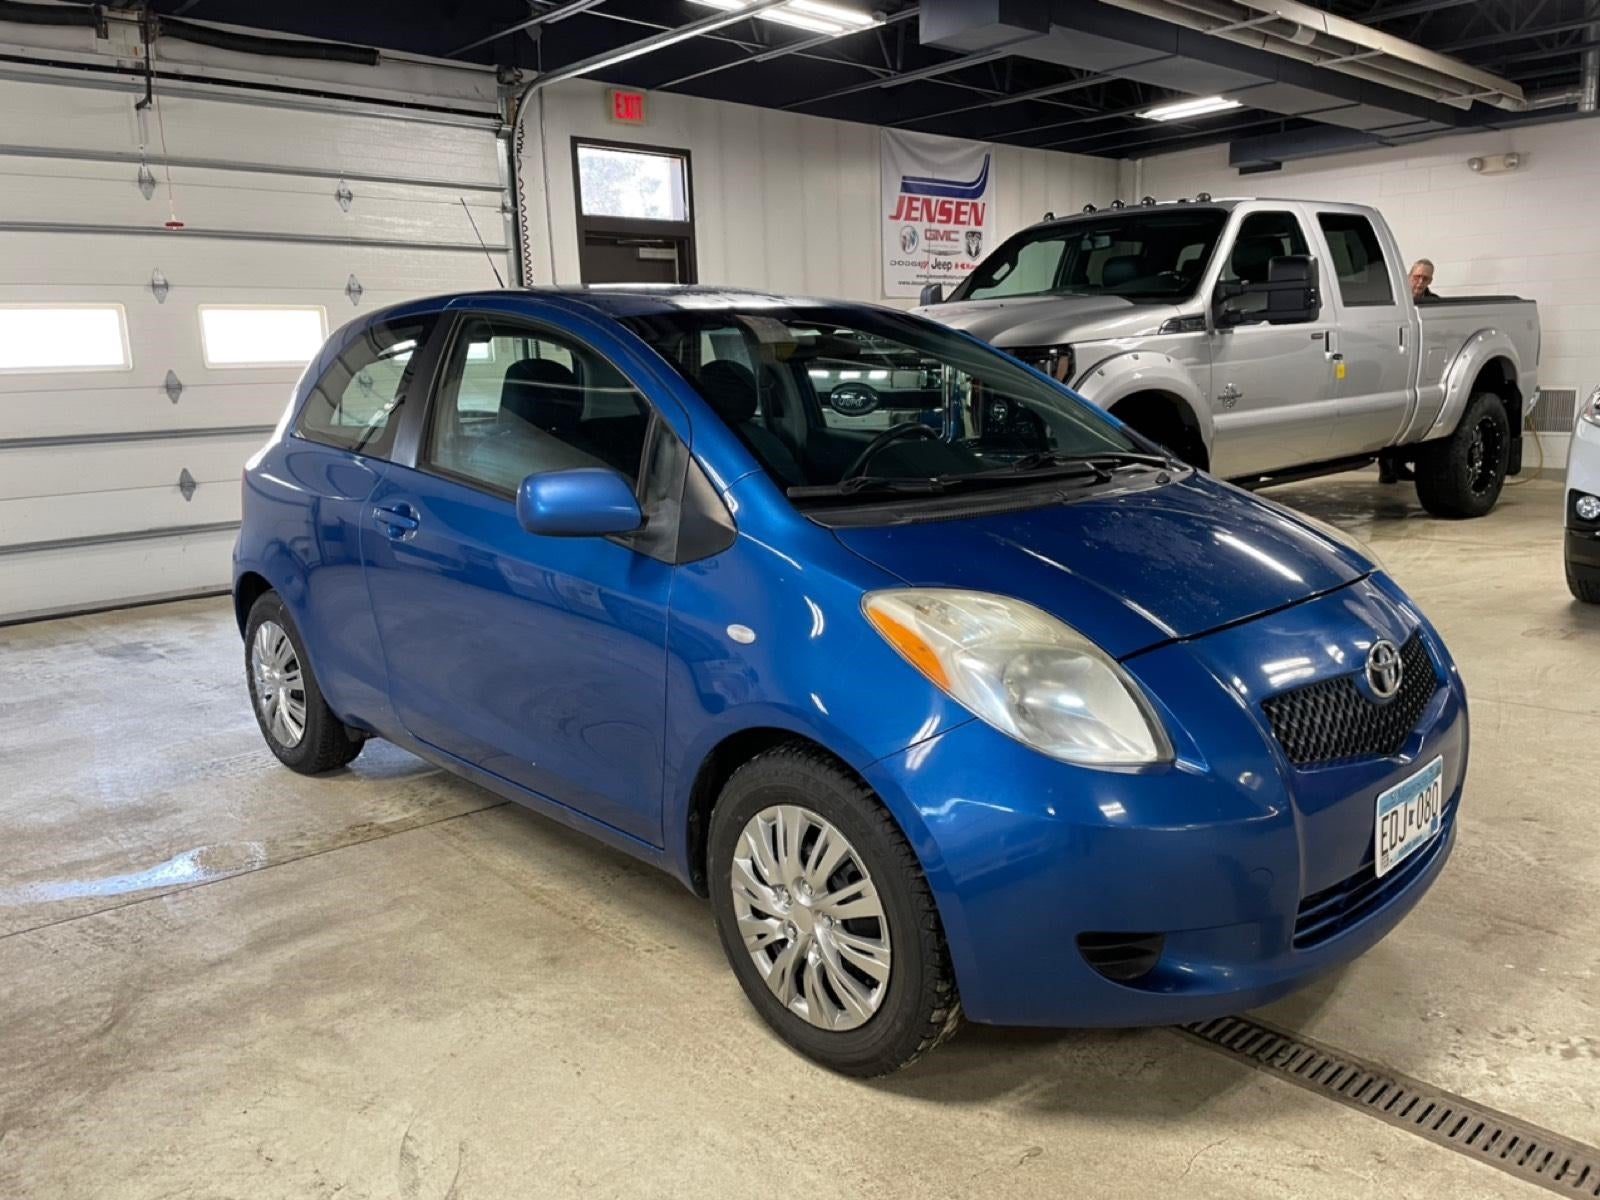 Used 2008 Toyota Yaris S with VIN JTDJT923585178962 for sale in New Ulm, Minnesota